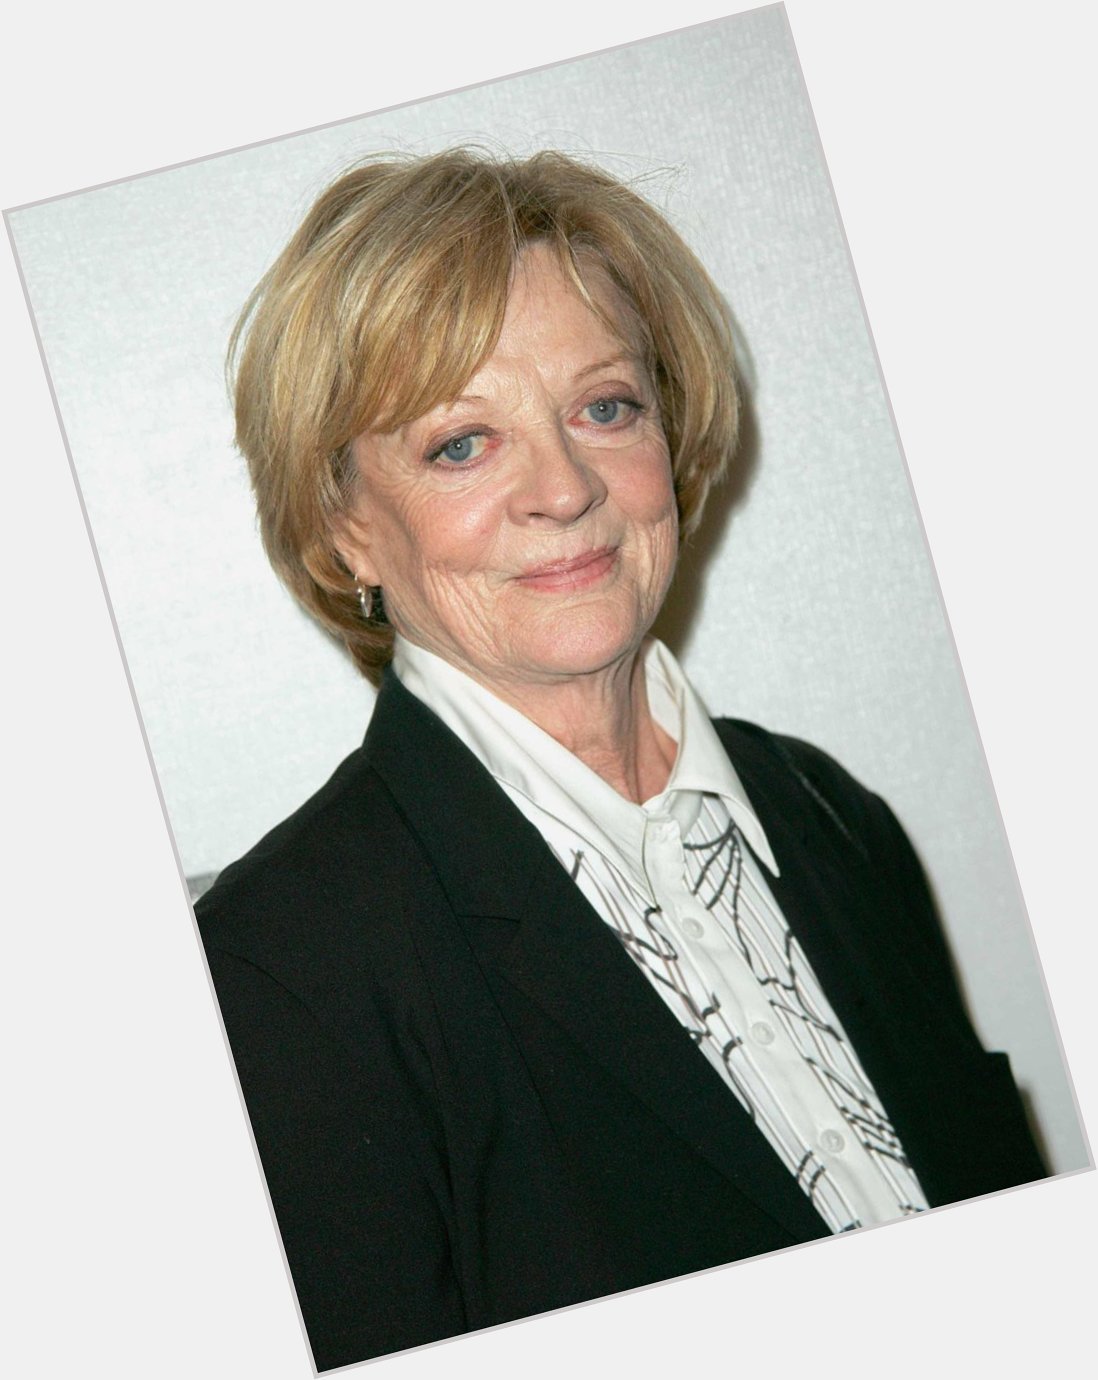 Happy Birthday Maggie Smith! The lovely Downton Abbey lady turns 80 today!  